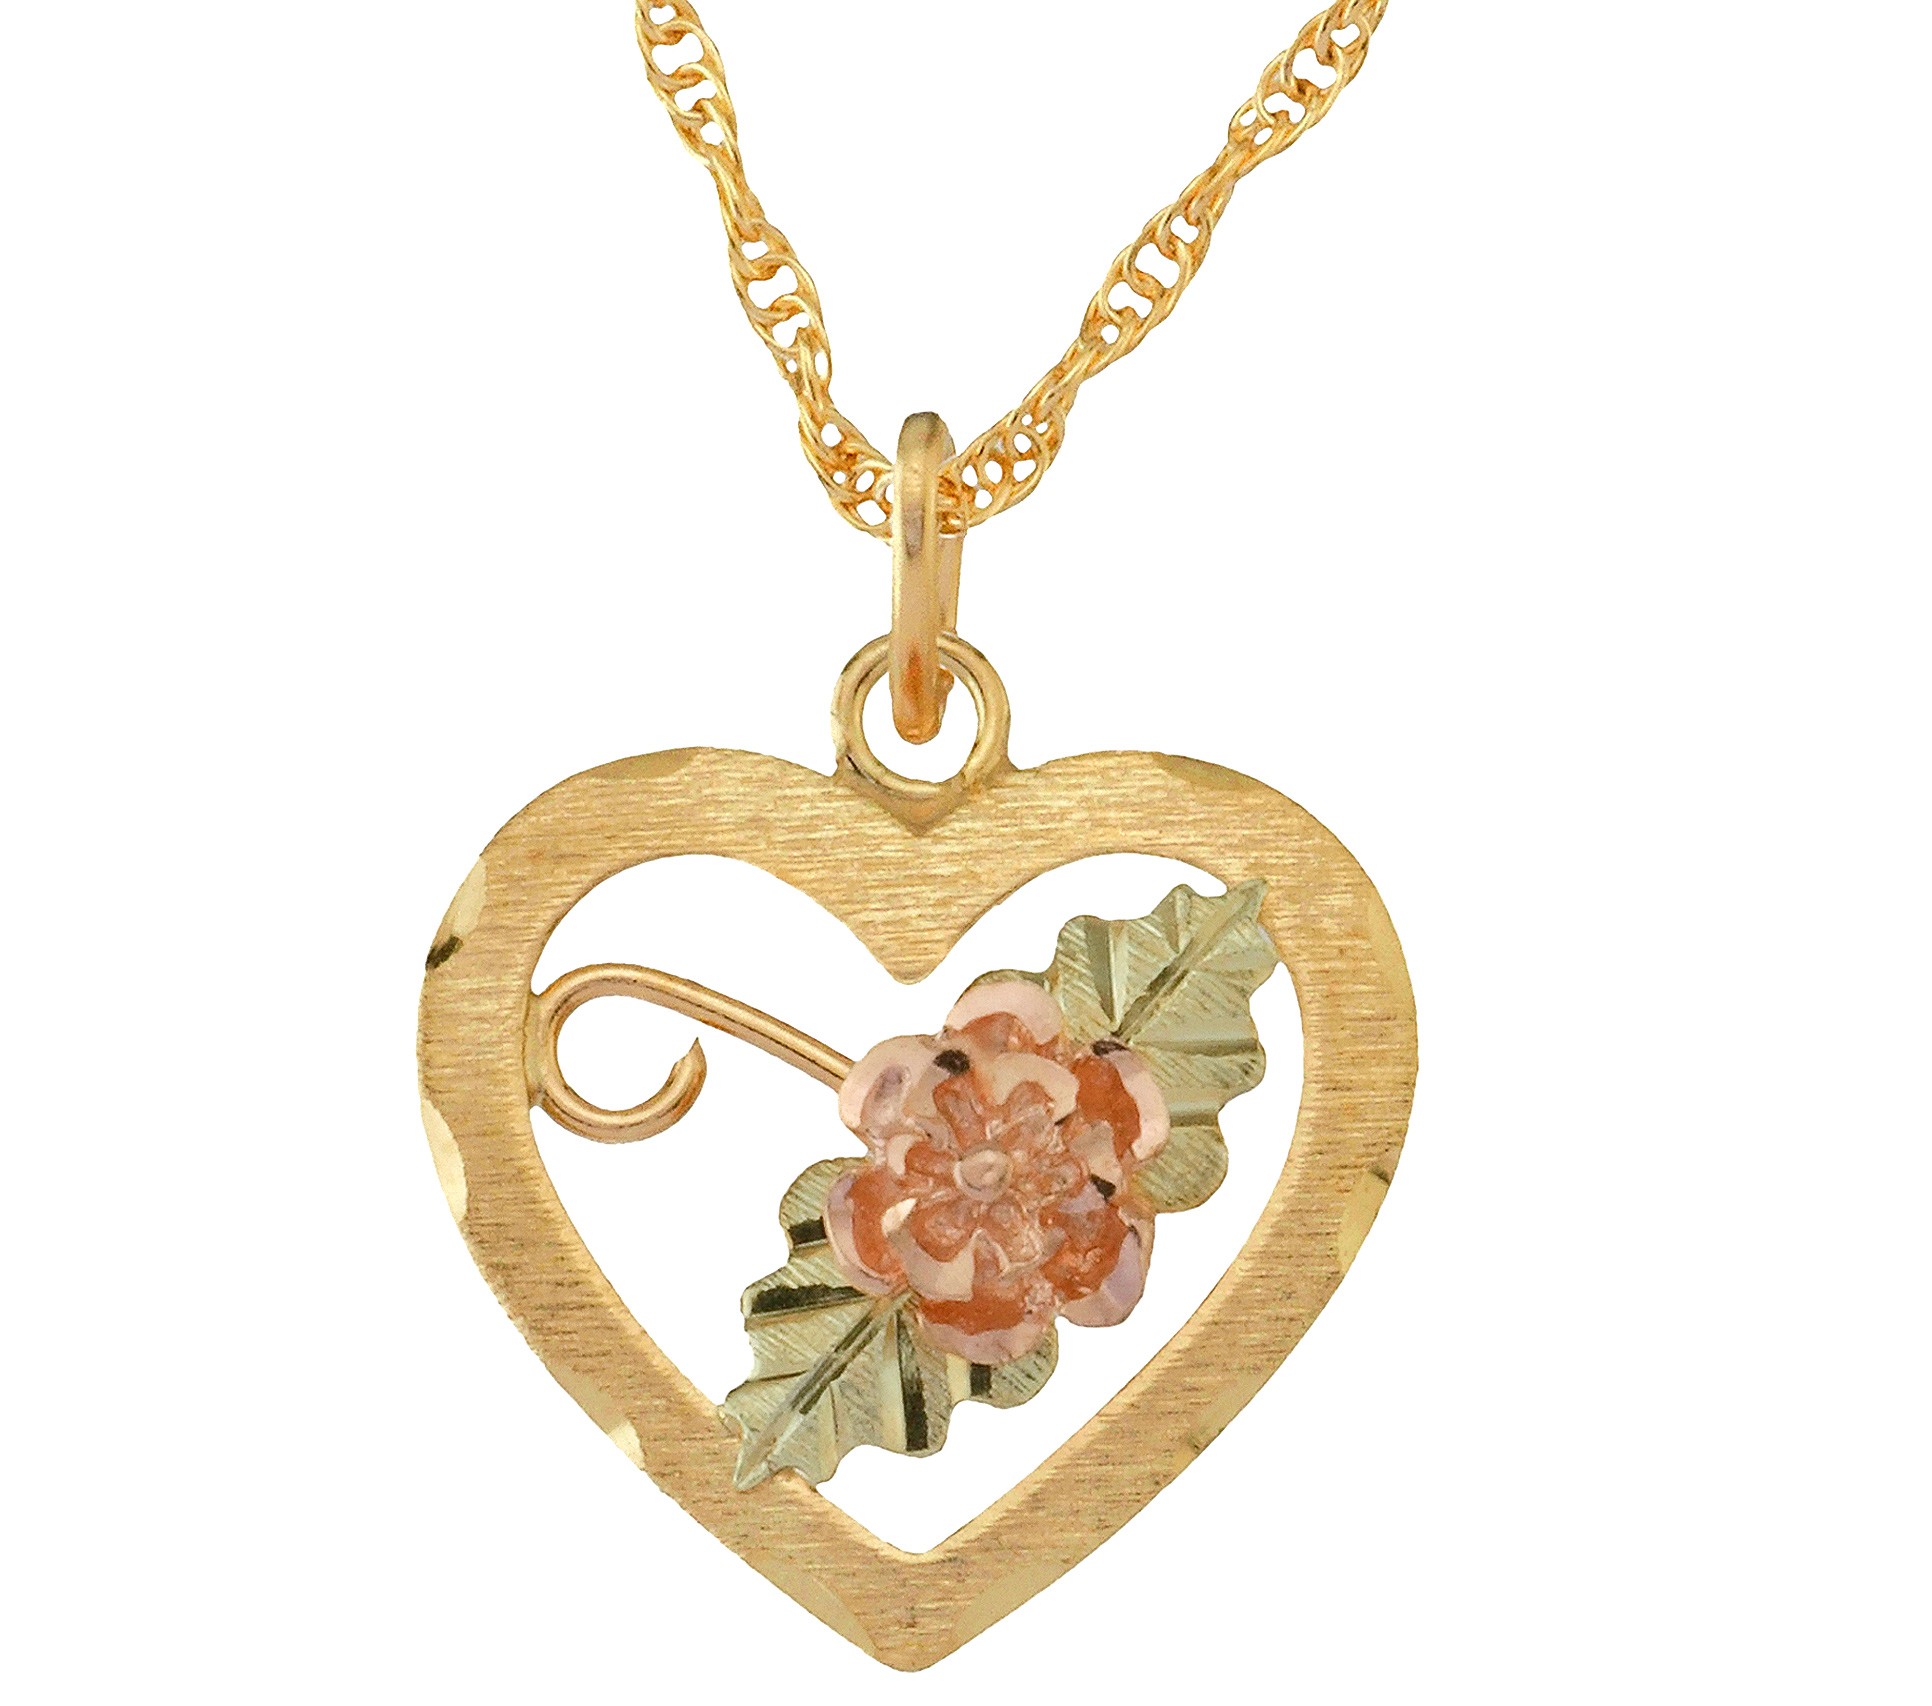 Black Hills Gold 10K Yellow Gold Open Heart Pendant with a 12K Rose  Supported by 12K Green Leaves | Wall Drug Store